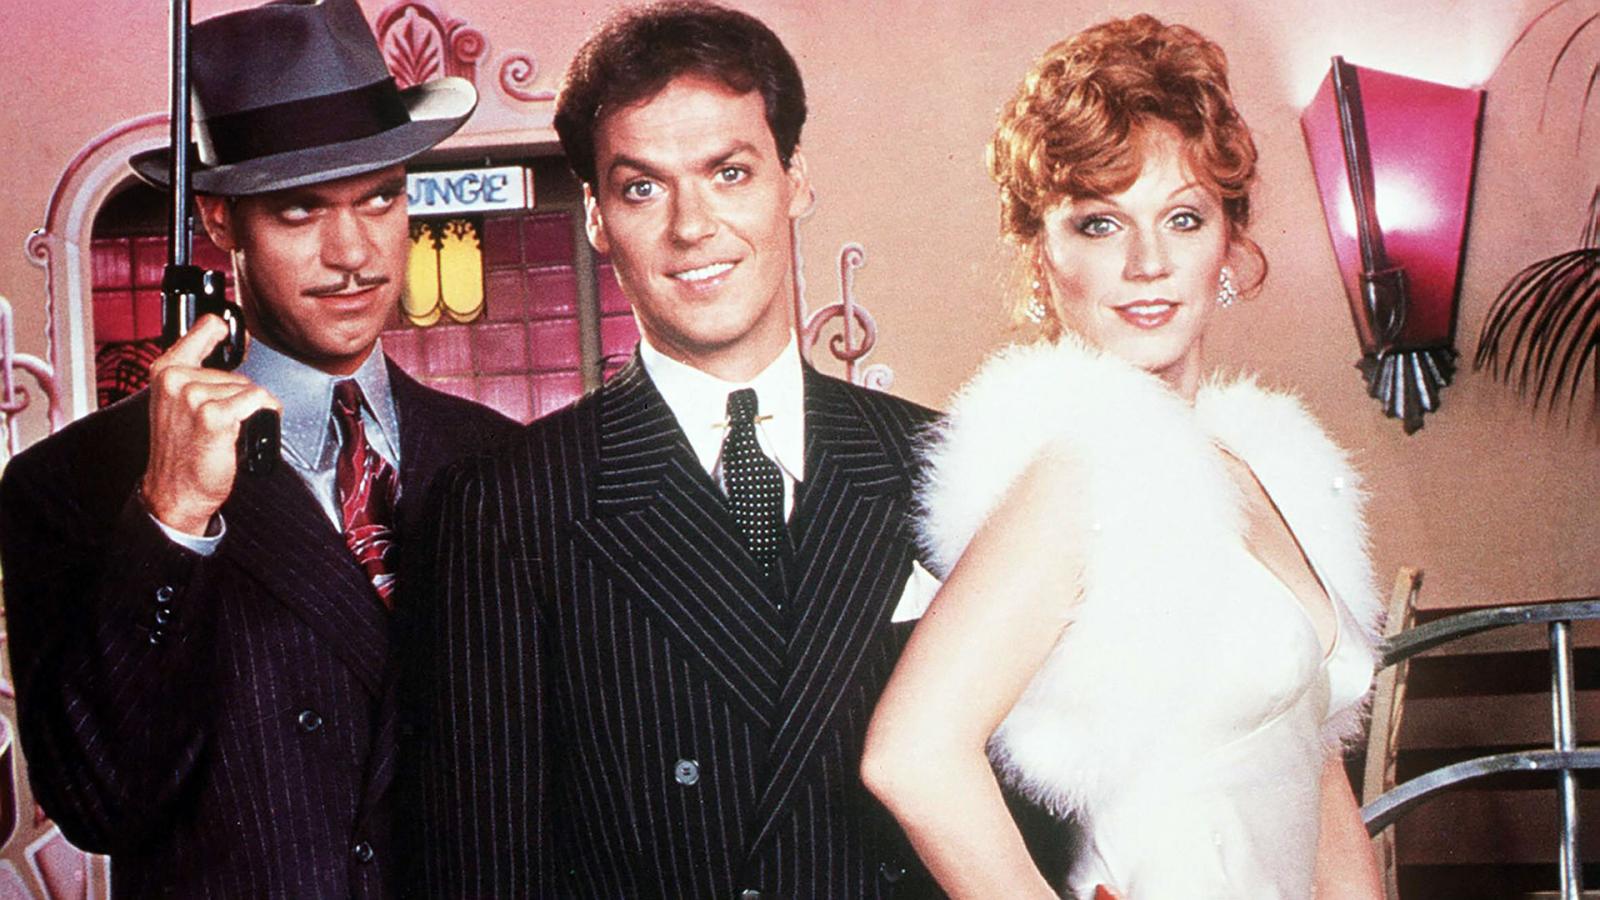 15 Most Underrated Comedy Movies of the 1980s, Ranked - image 6